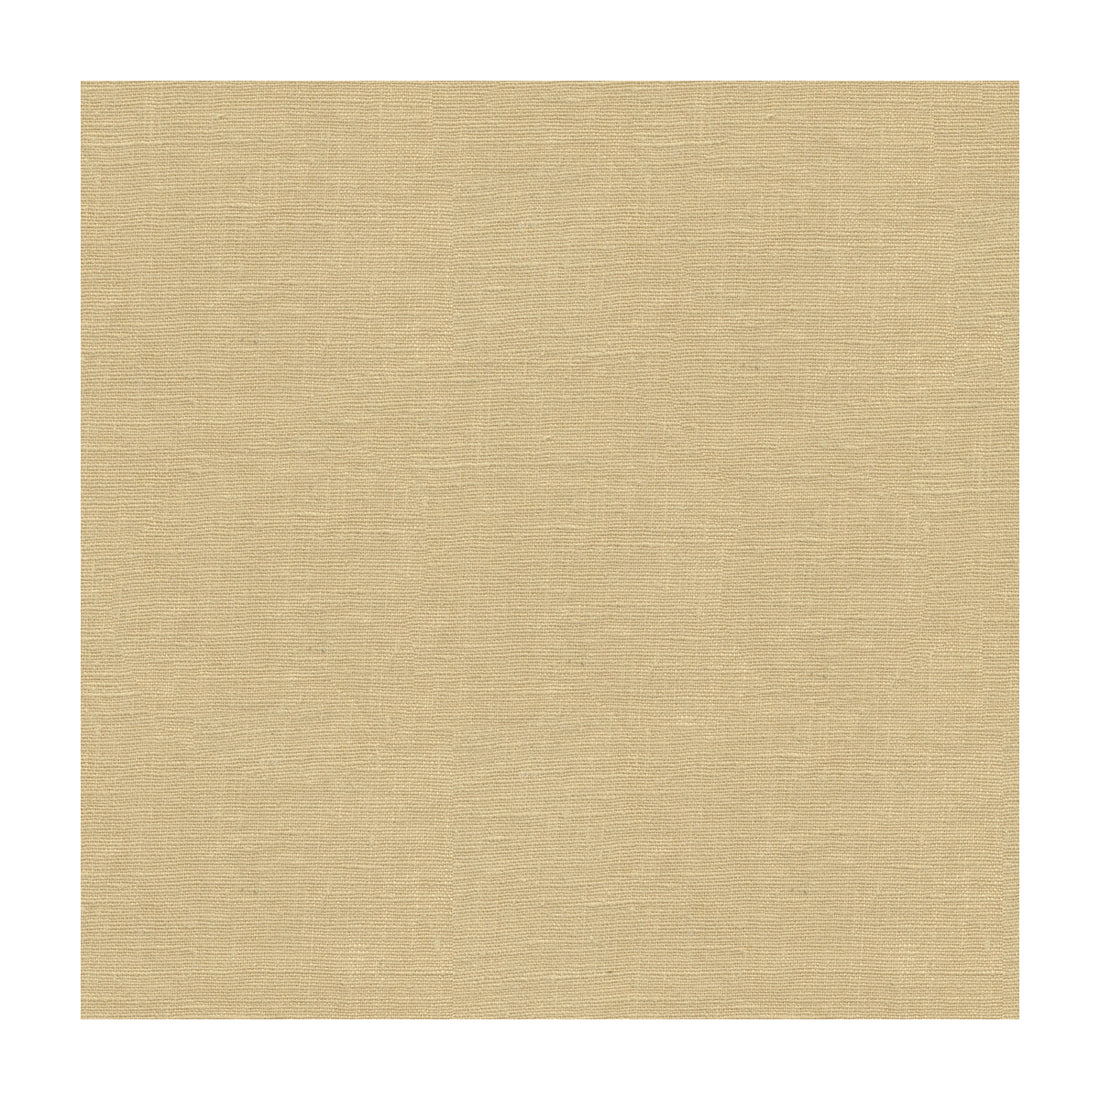 Dublin fabric in almond color - pattern 32344.16.0 - by Kravet Basics in the Perfect Plains collection